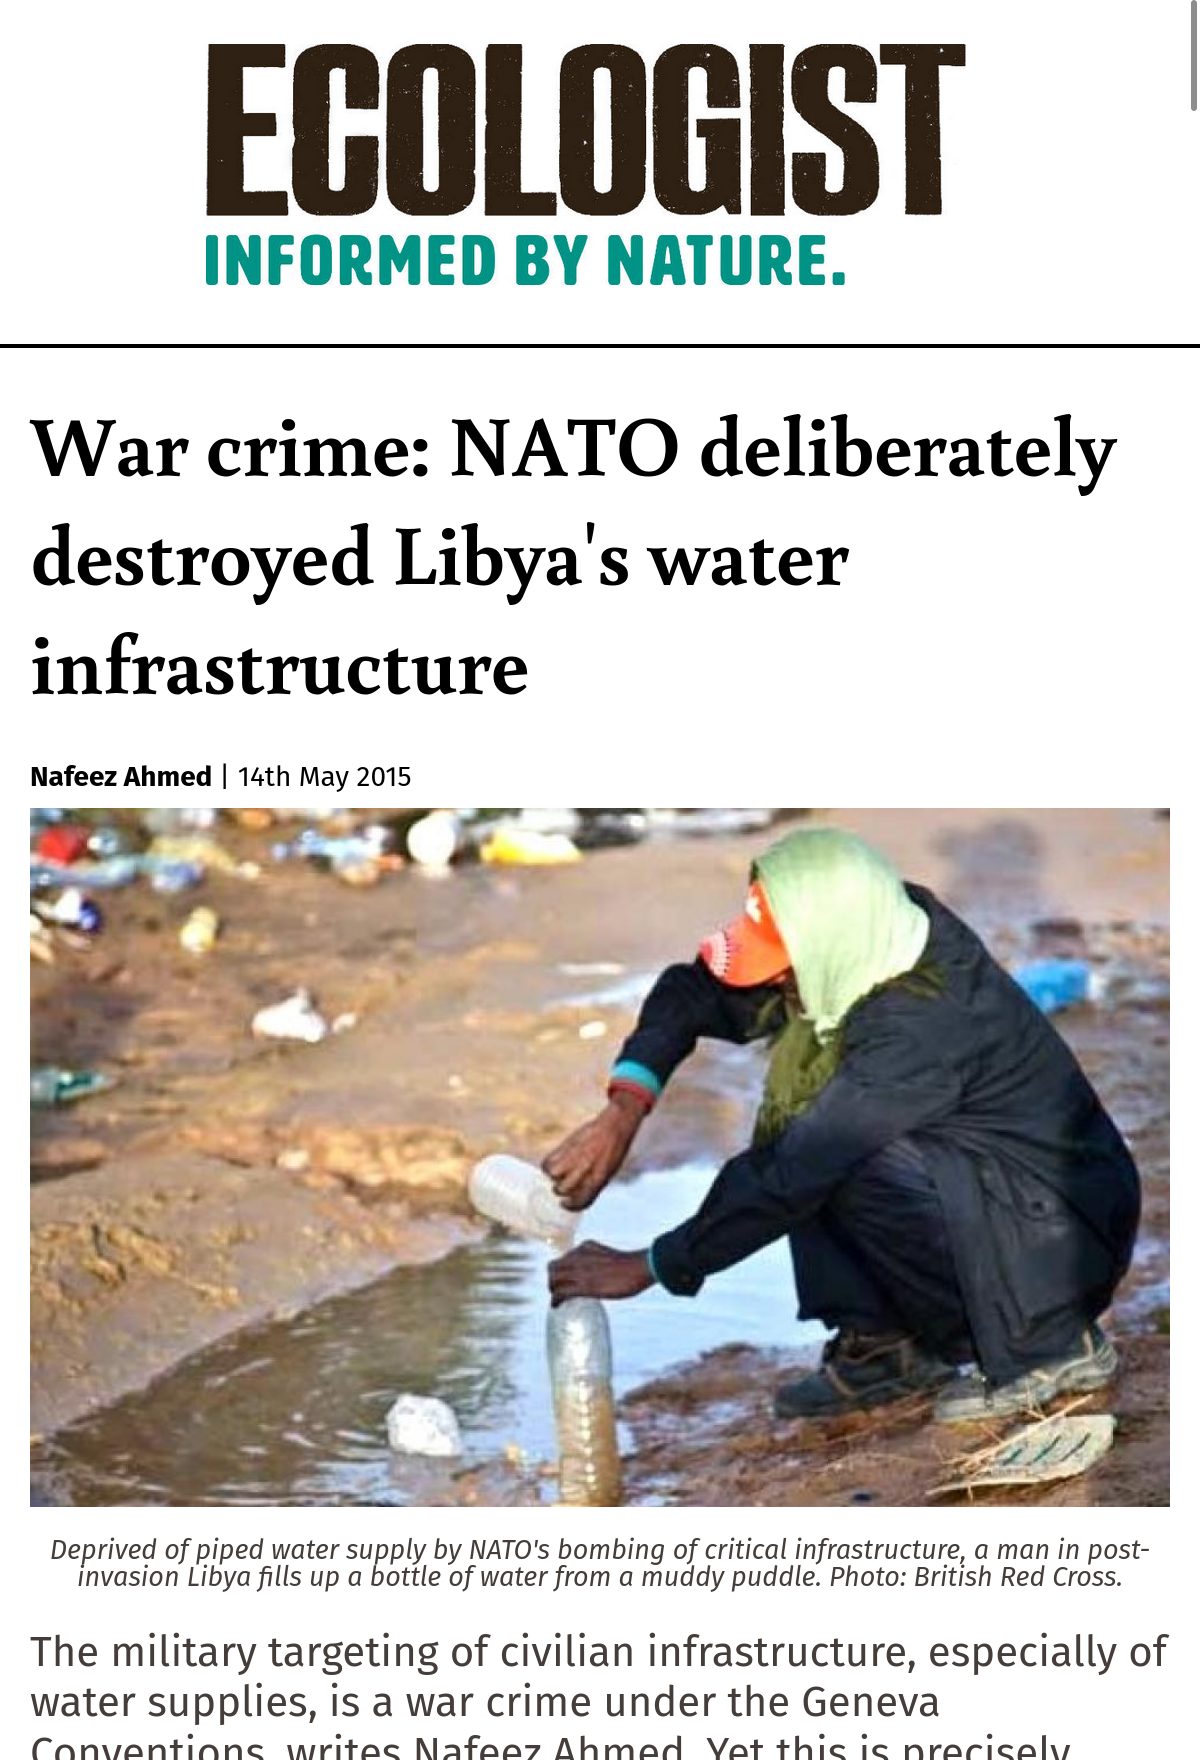 NATO deliberately destroyed Libya's Water Infrastructure